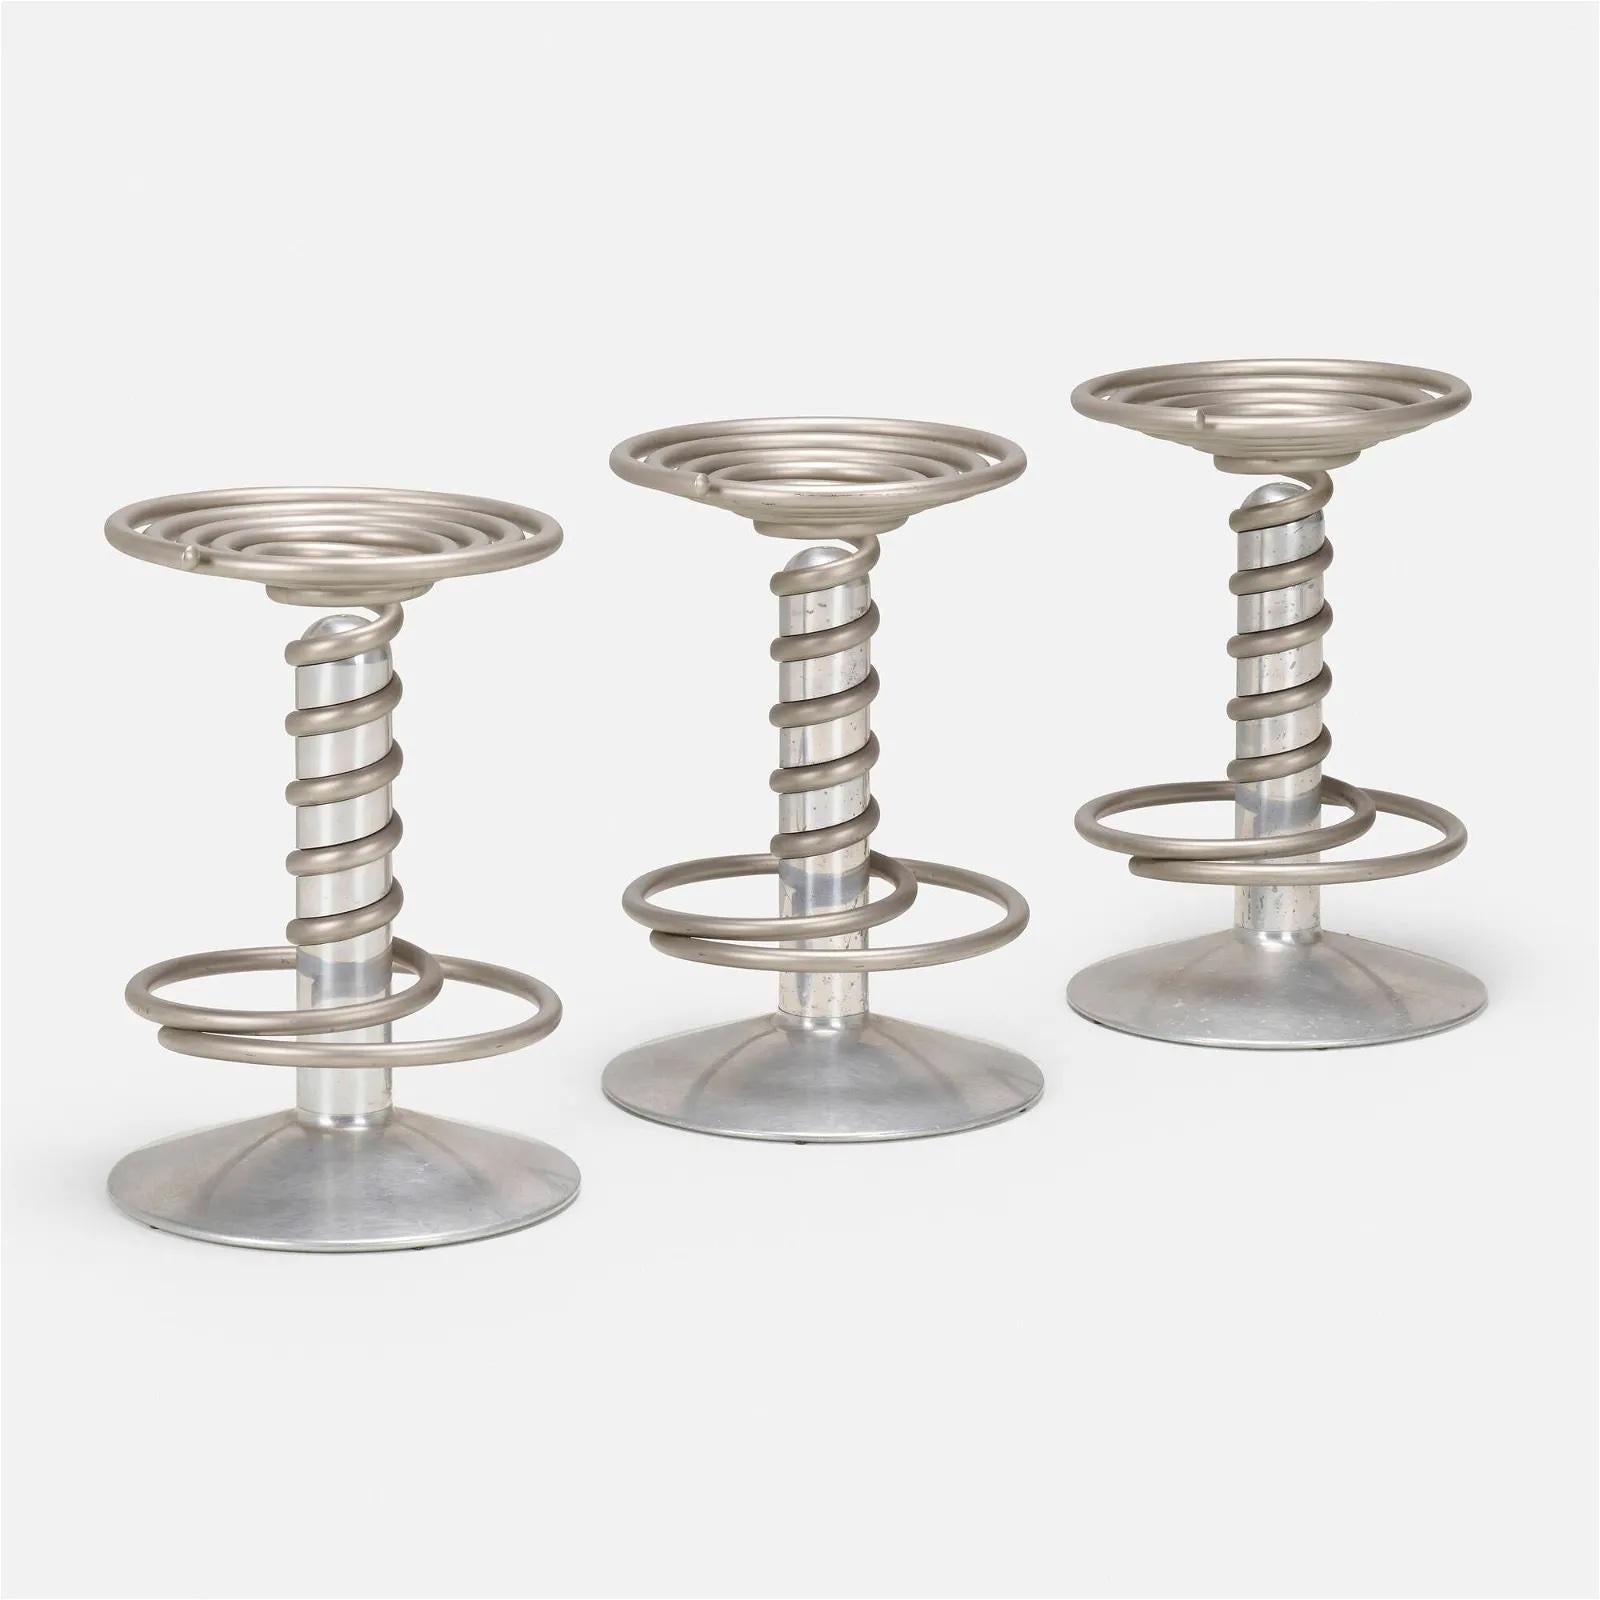 Ron Arad Screw Stools Set of Three Driade Italy Sculpture Industrial Stainless

Ron Arad
Screw stools, set of three
Driade
United Kingdom / Italy, 2006
Stainless steel and aluminum
23.5 h x 16.125 dia in (60 x 41 cm)

Decal manufacturer's mark to